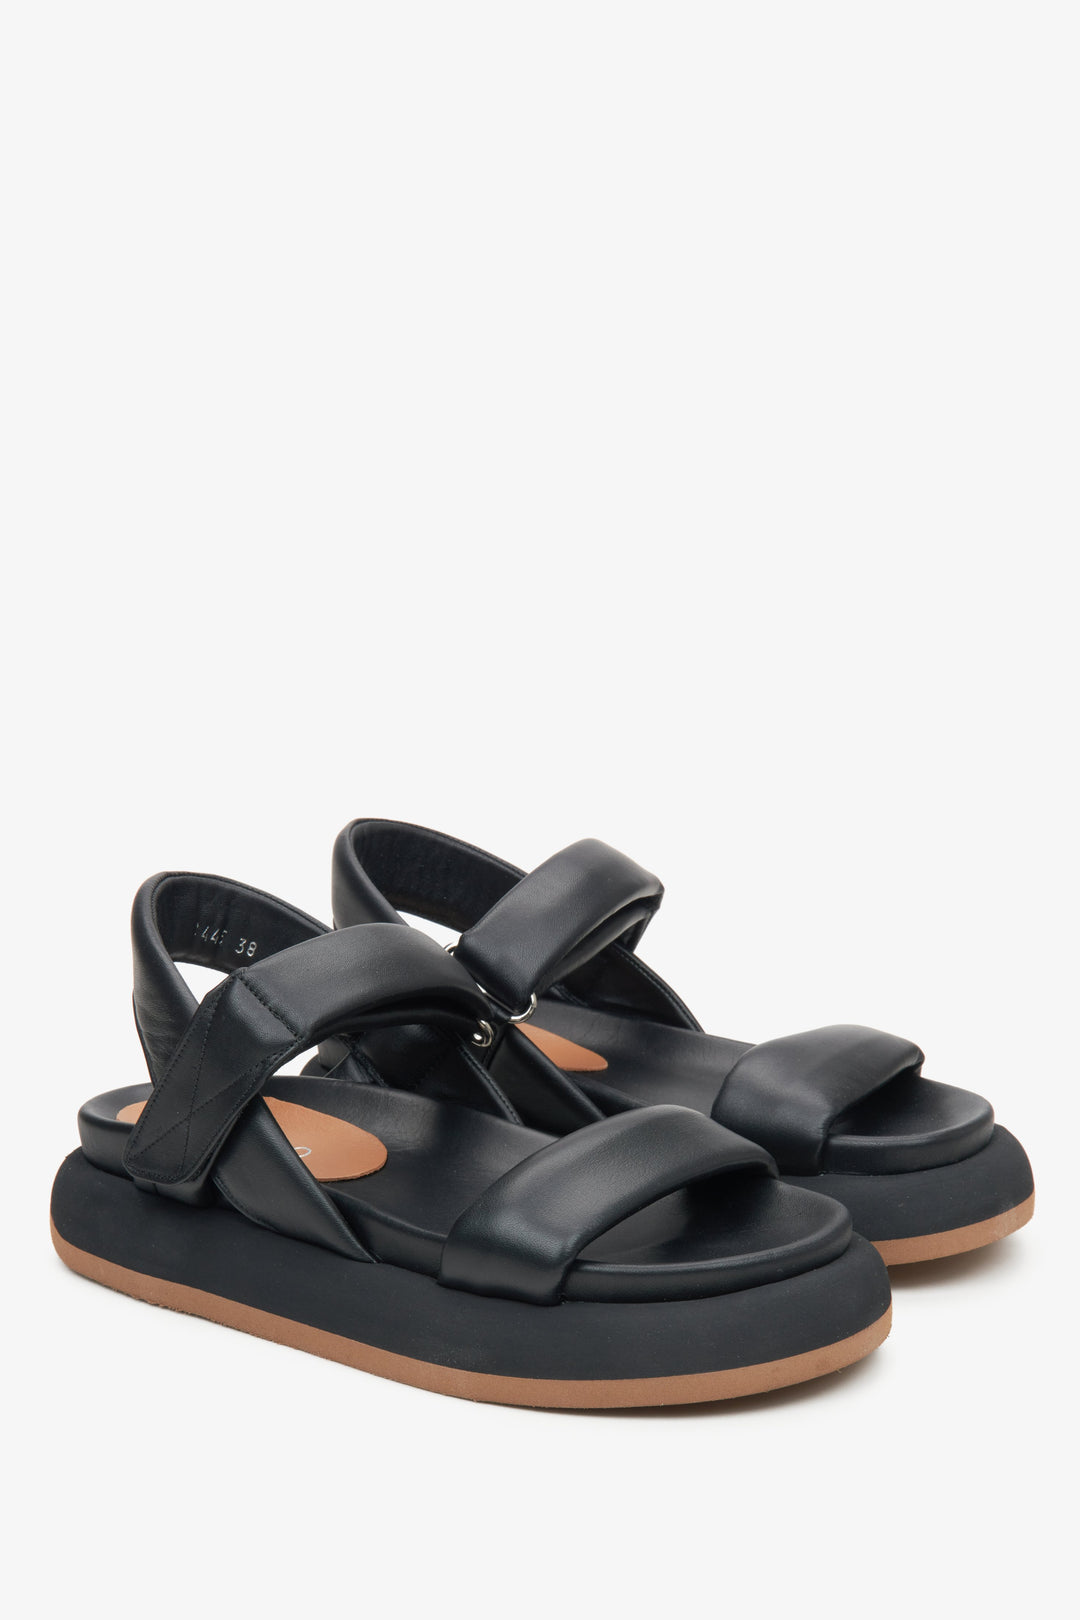 Women's black sandals with a soft sole by Estro.